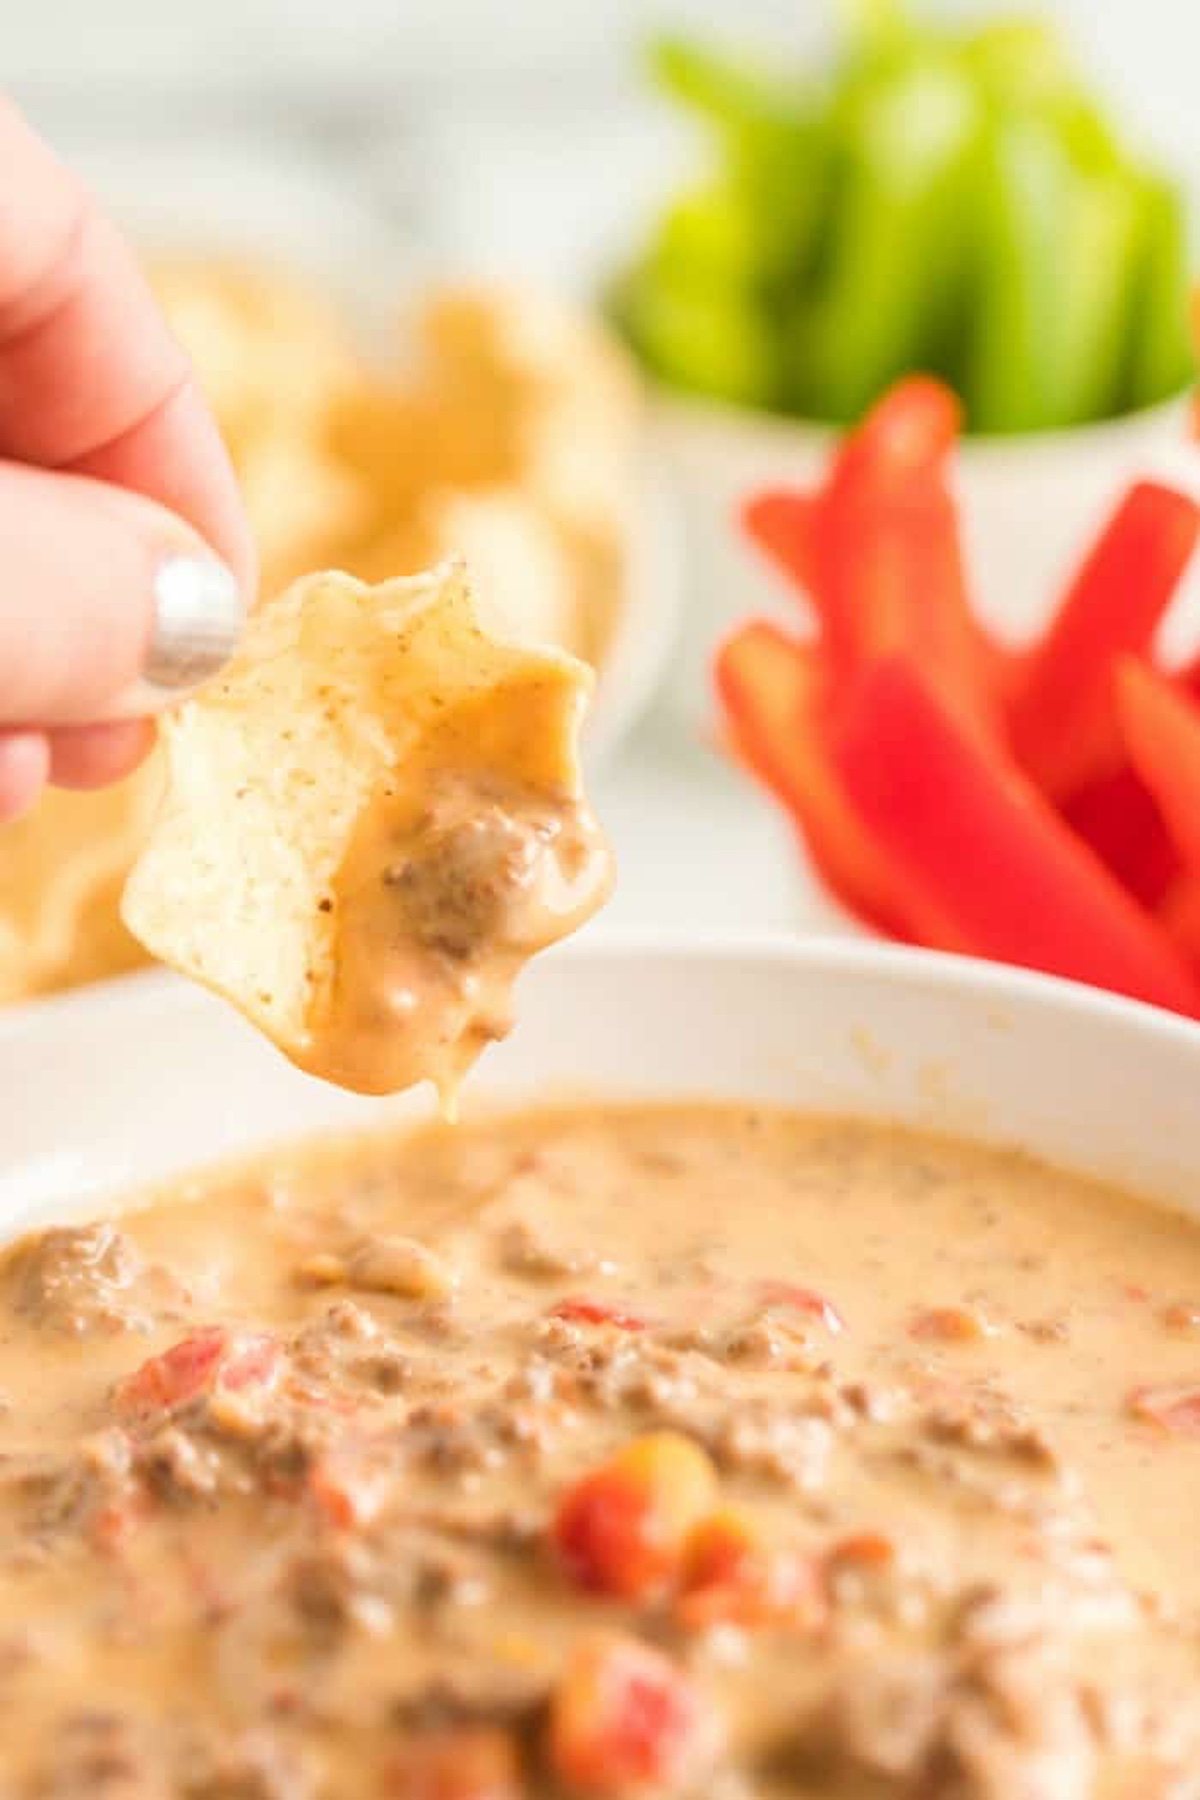 A bowl-shaped chip is dipped into a melty cheese dip.